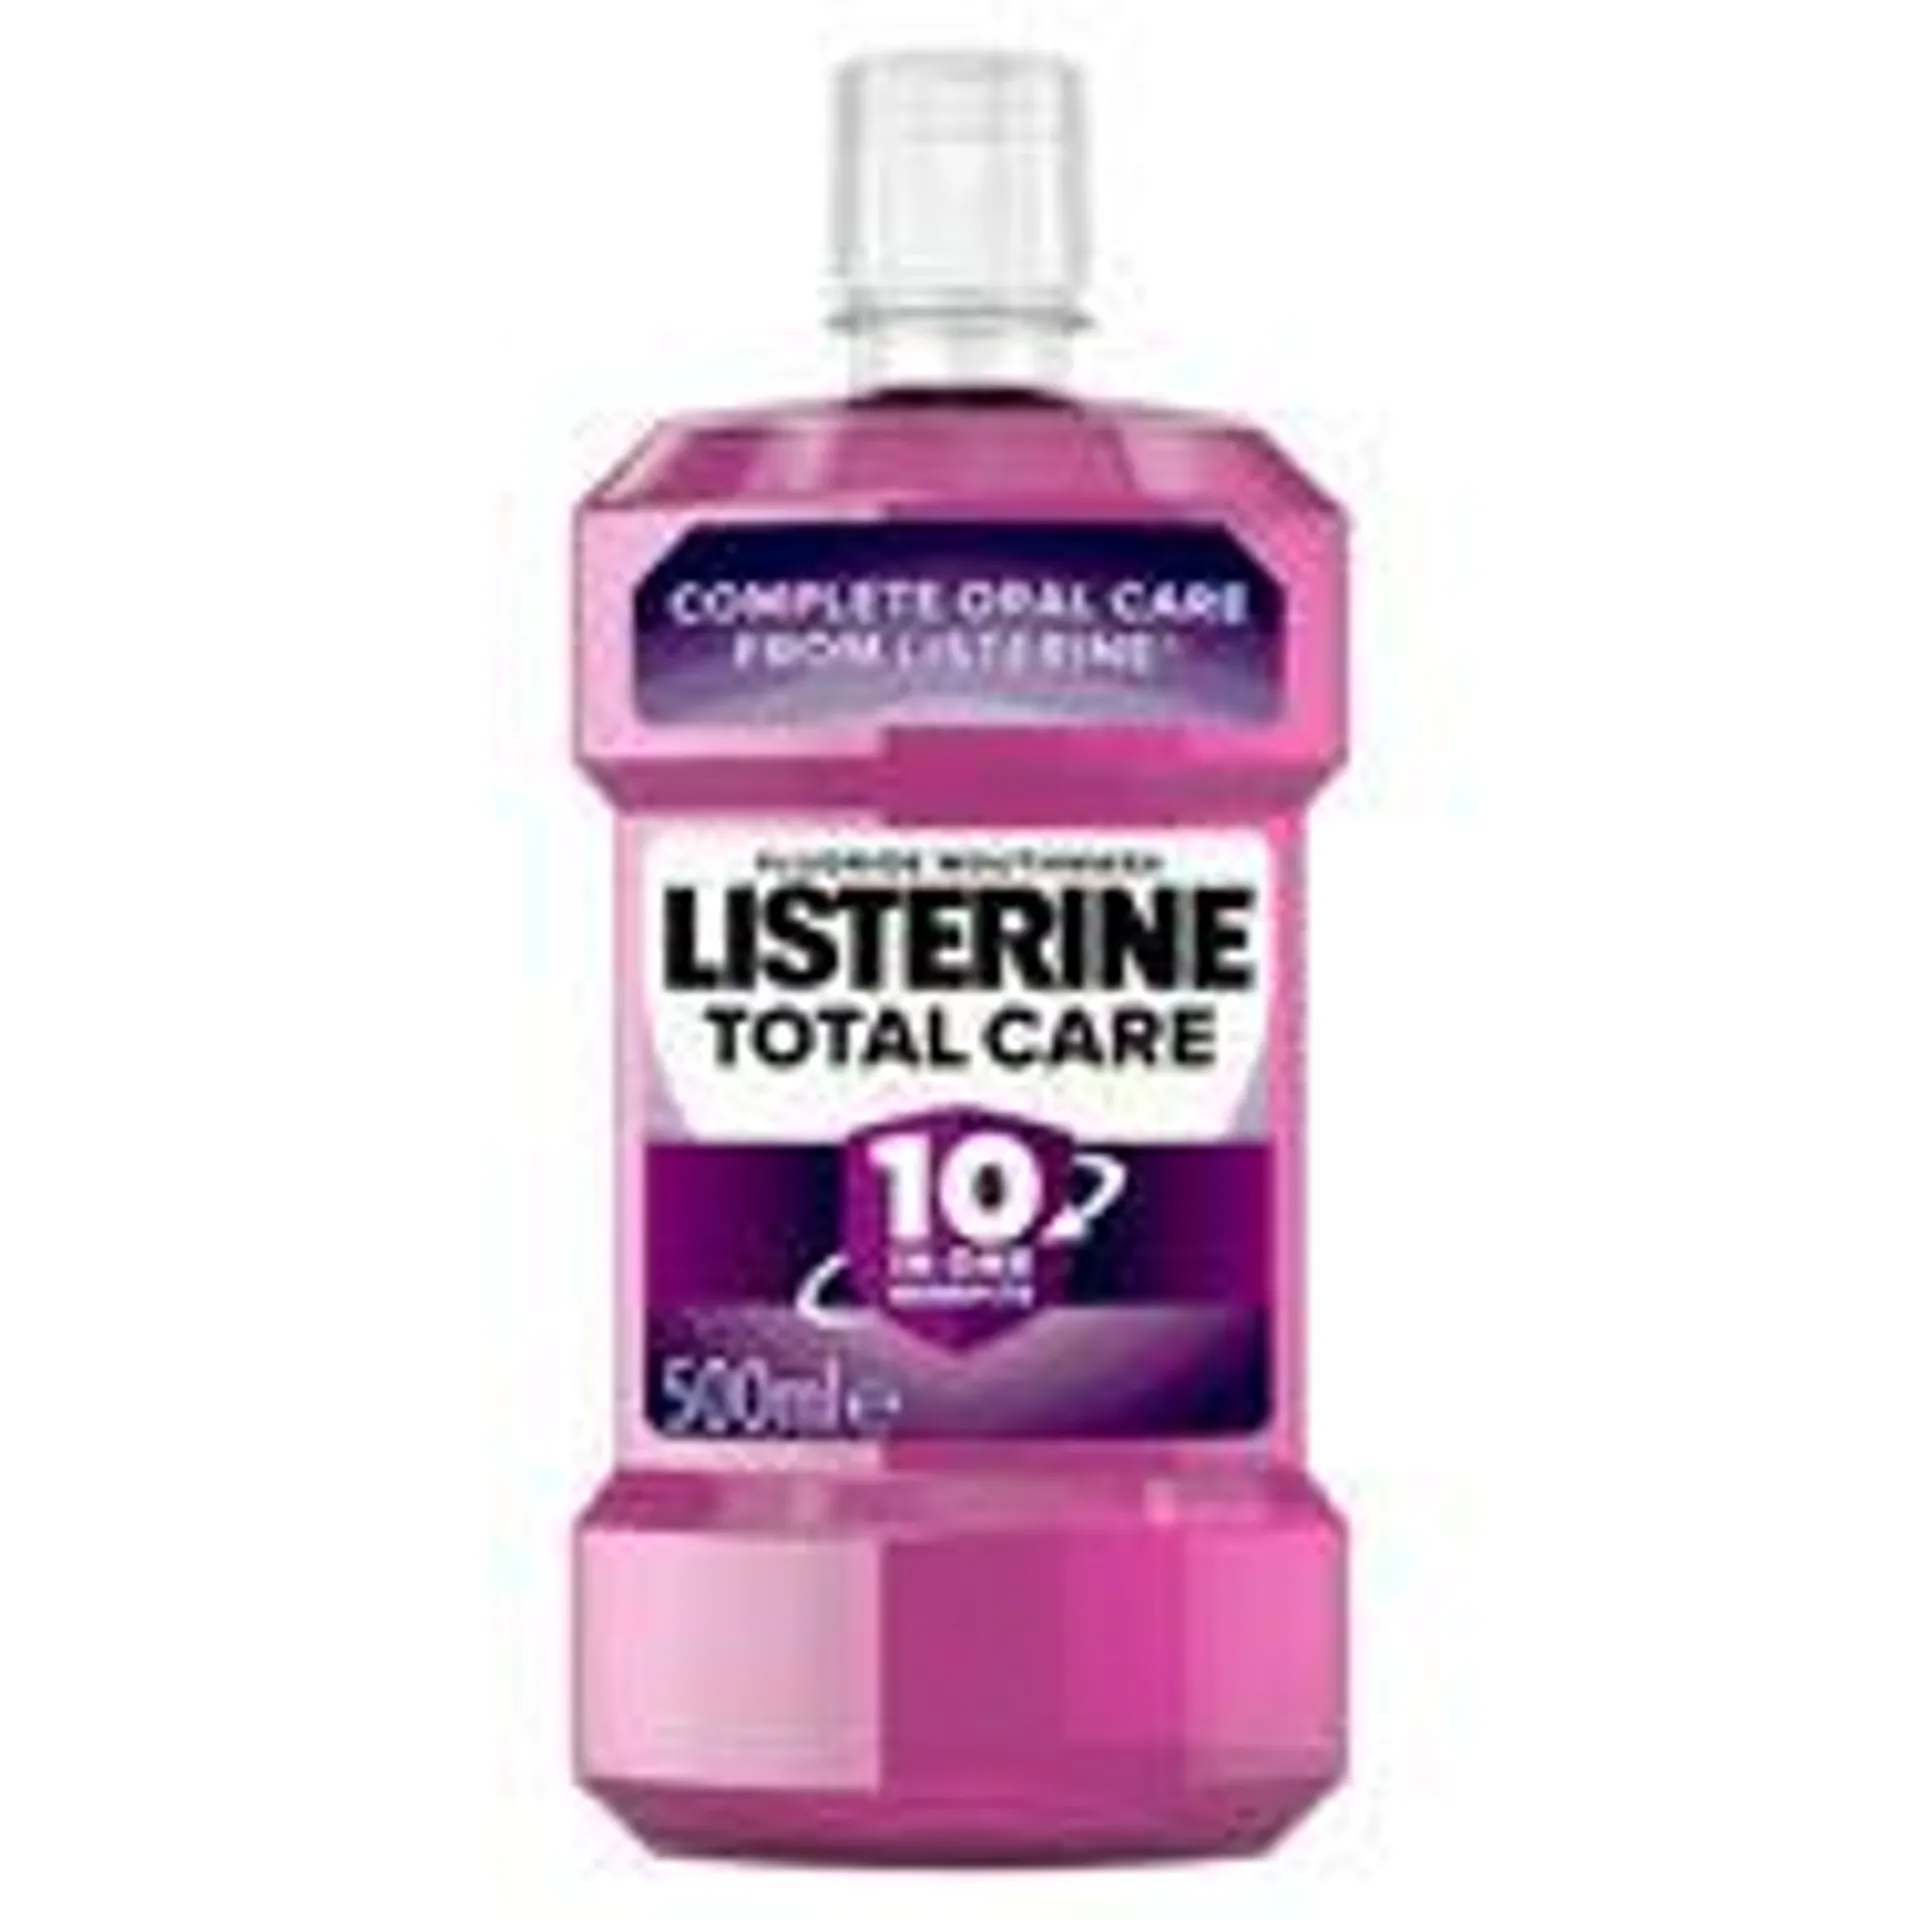 Listerine Total Care Clean Mint Antibacterial Mouthwash